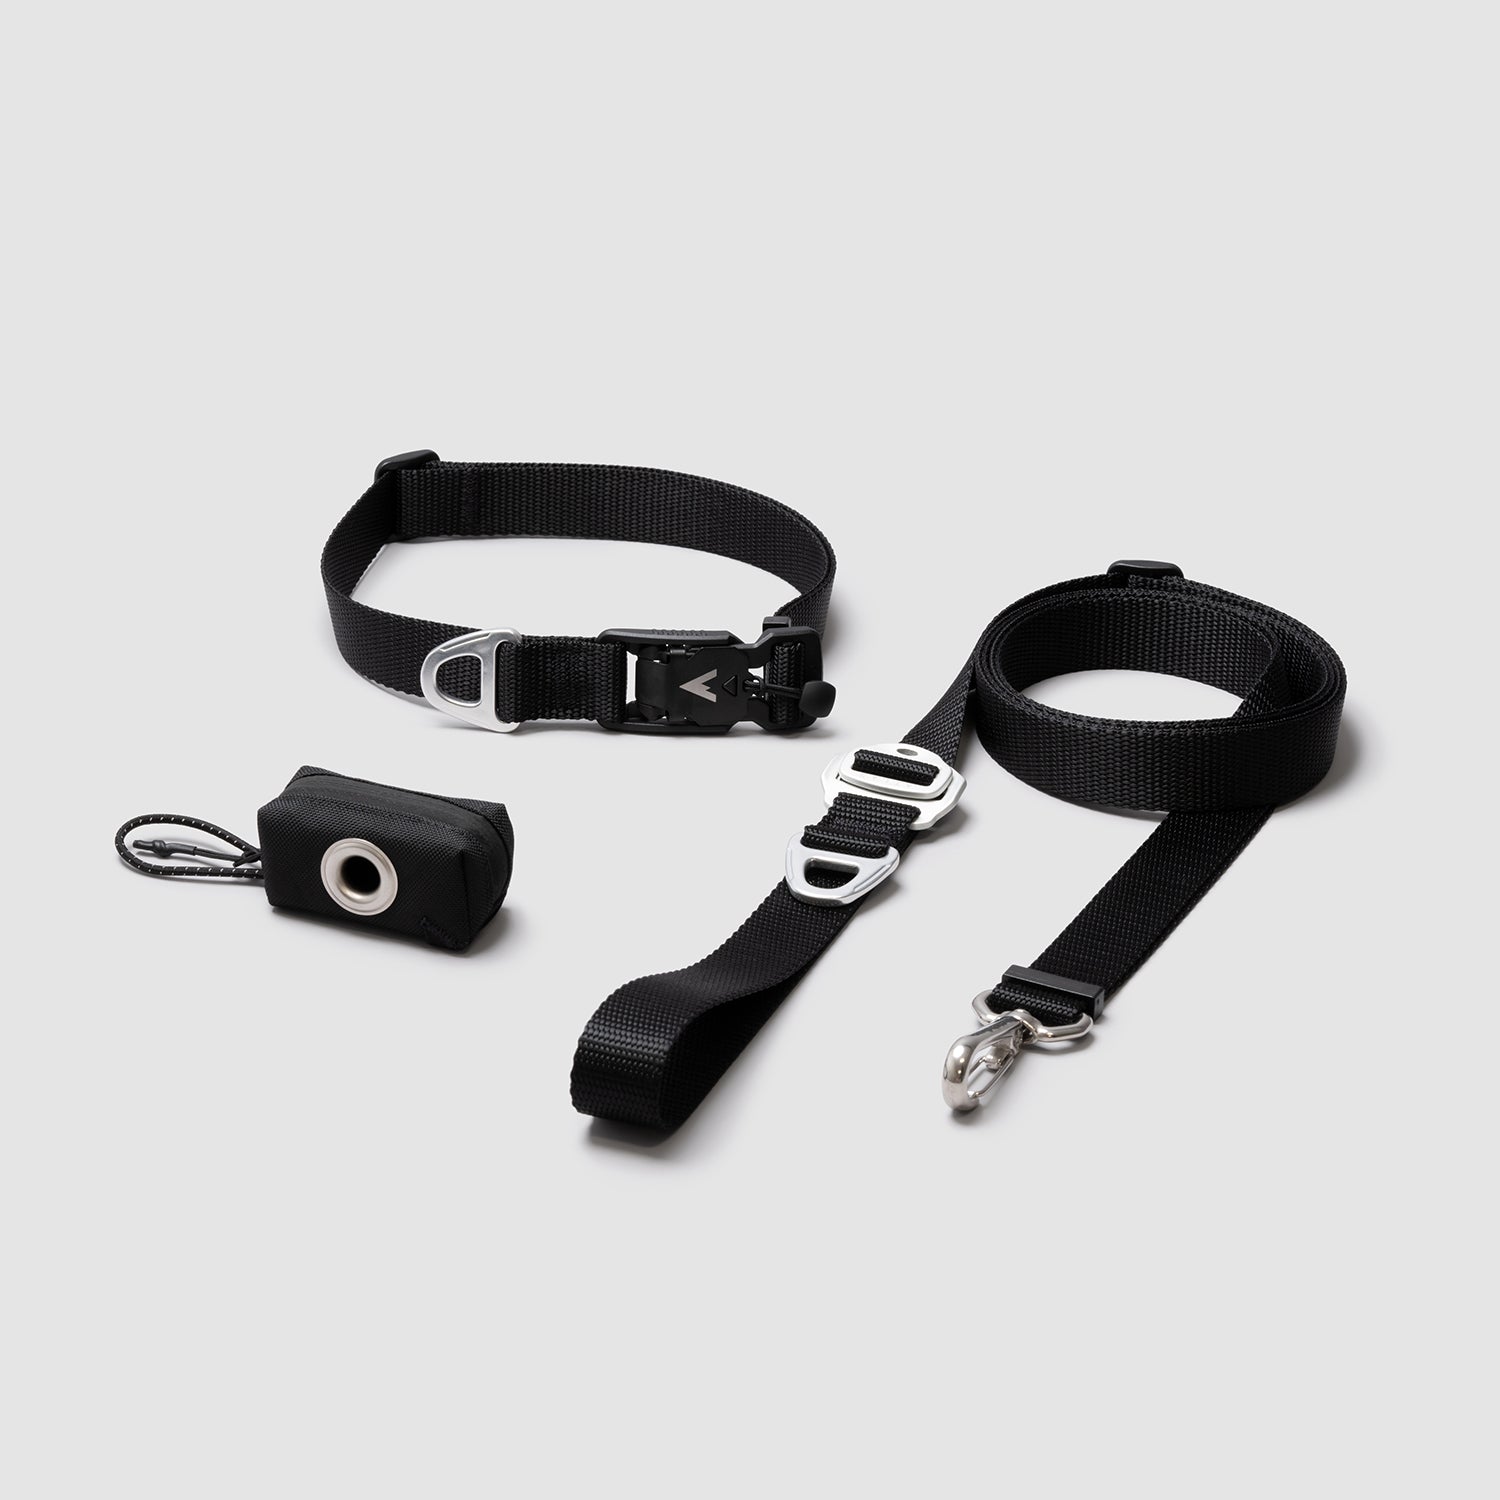 Small Heavy Duty Dog Collar and Leash Kit - paracordwholesale